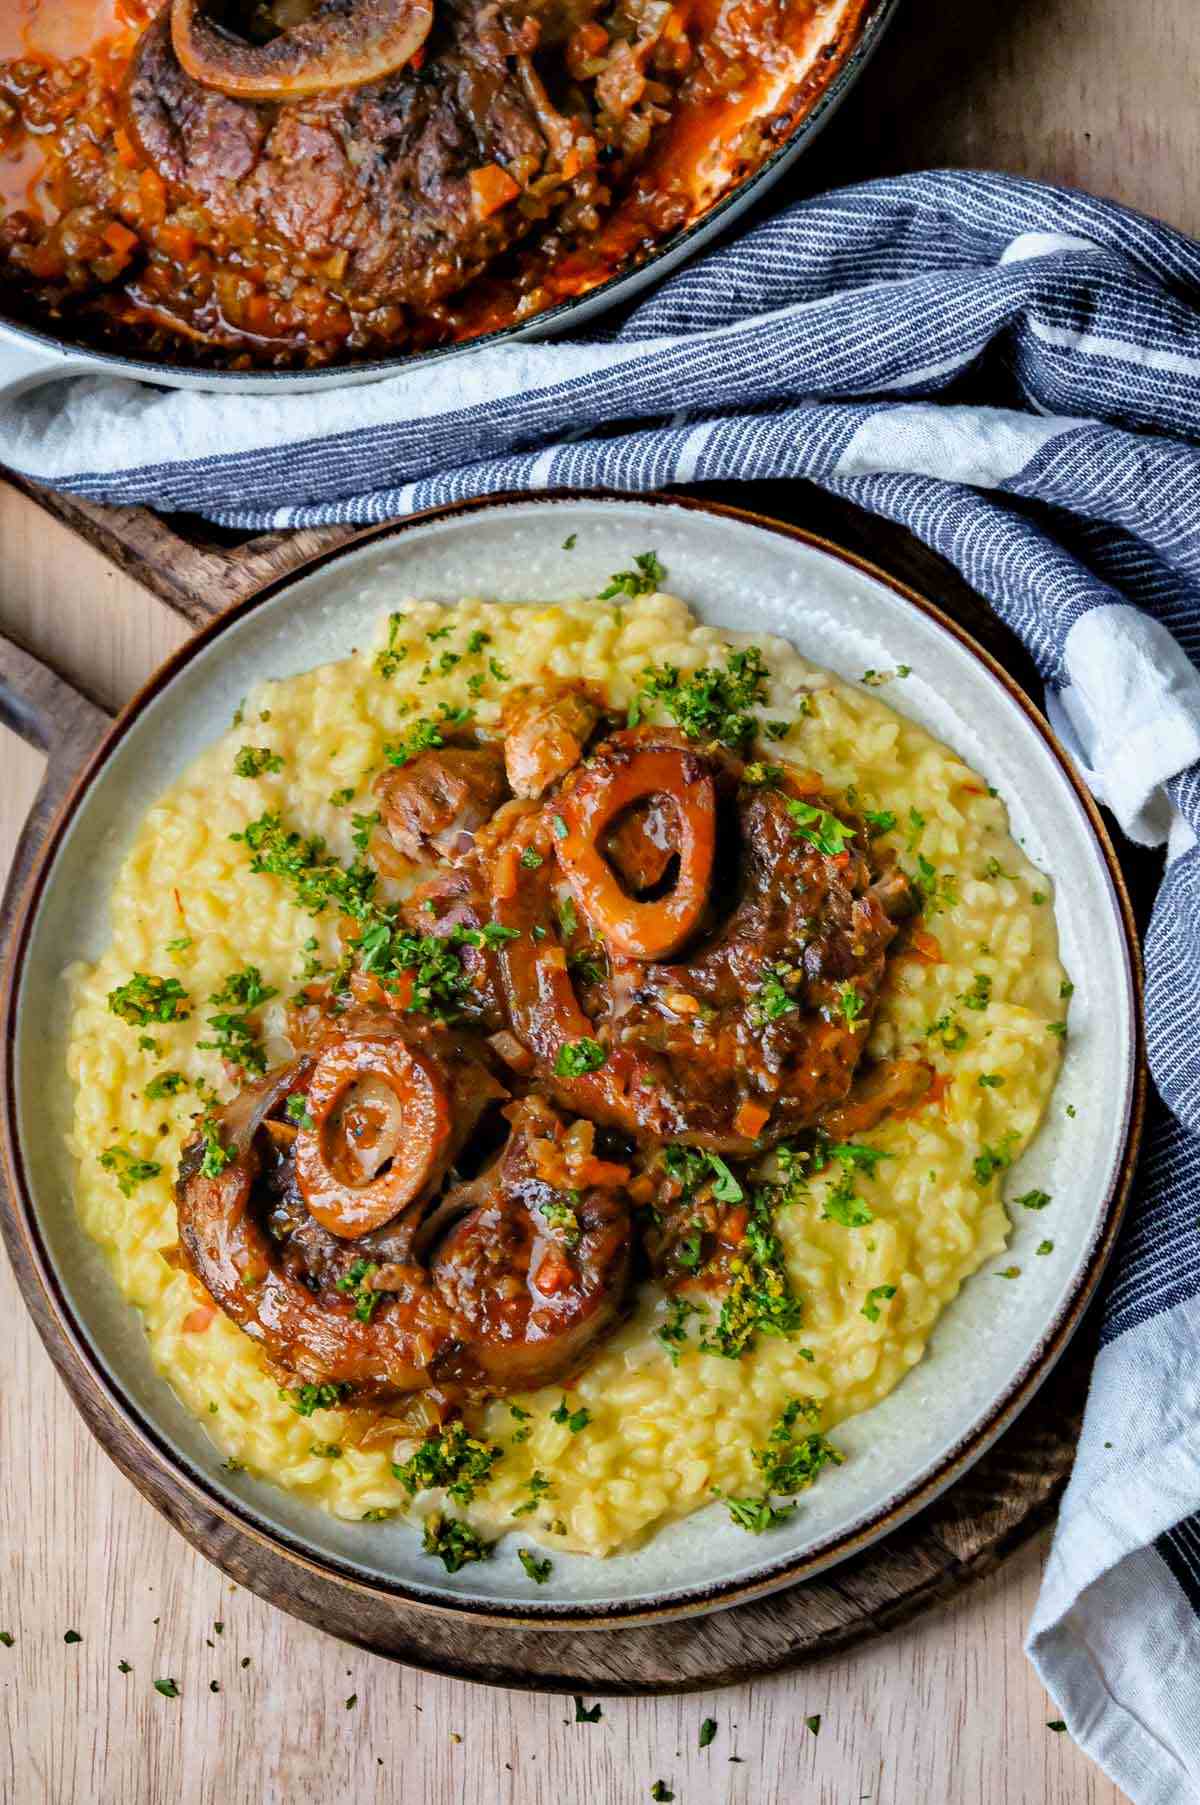 Milanese style braised veal shanks on saffron risotto.